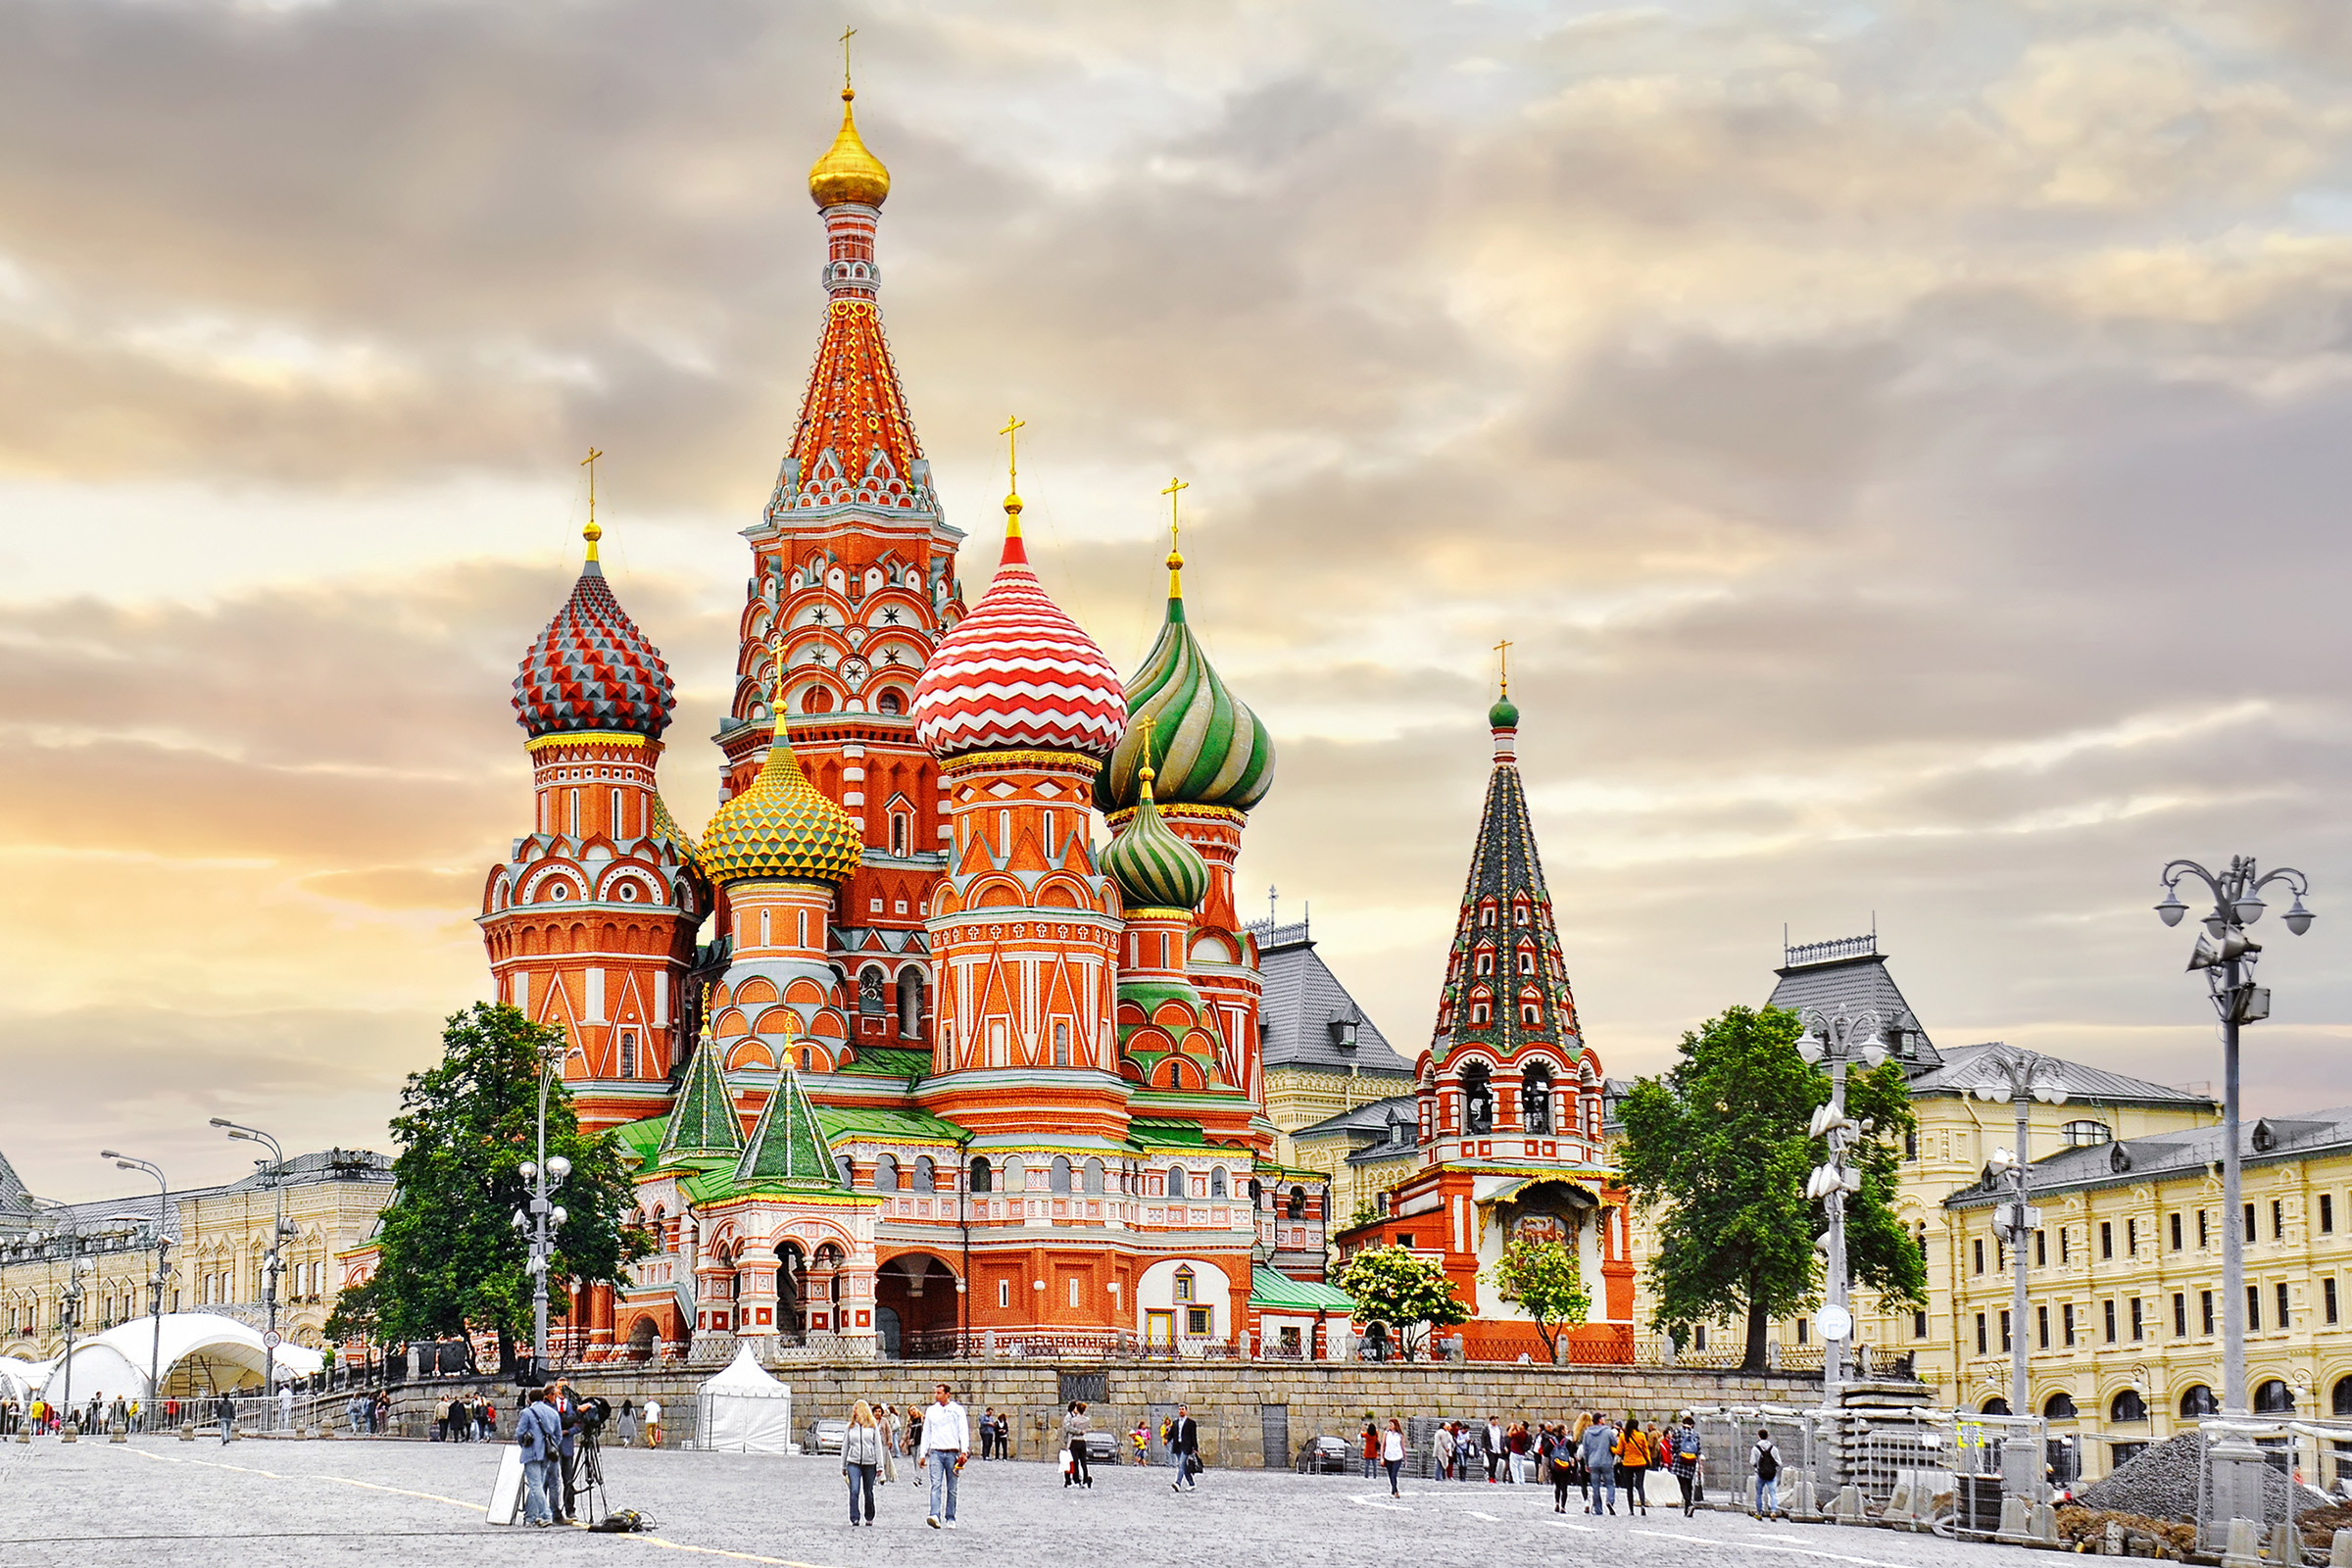 Russia|RussiaTour Packages - Book honeymoon ,family,adventure tour packages to Russia|Travel Knits												